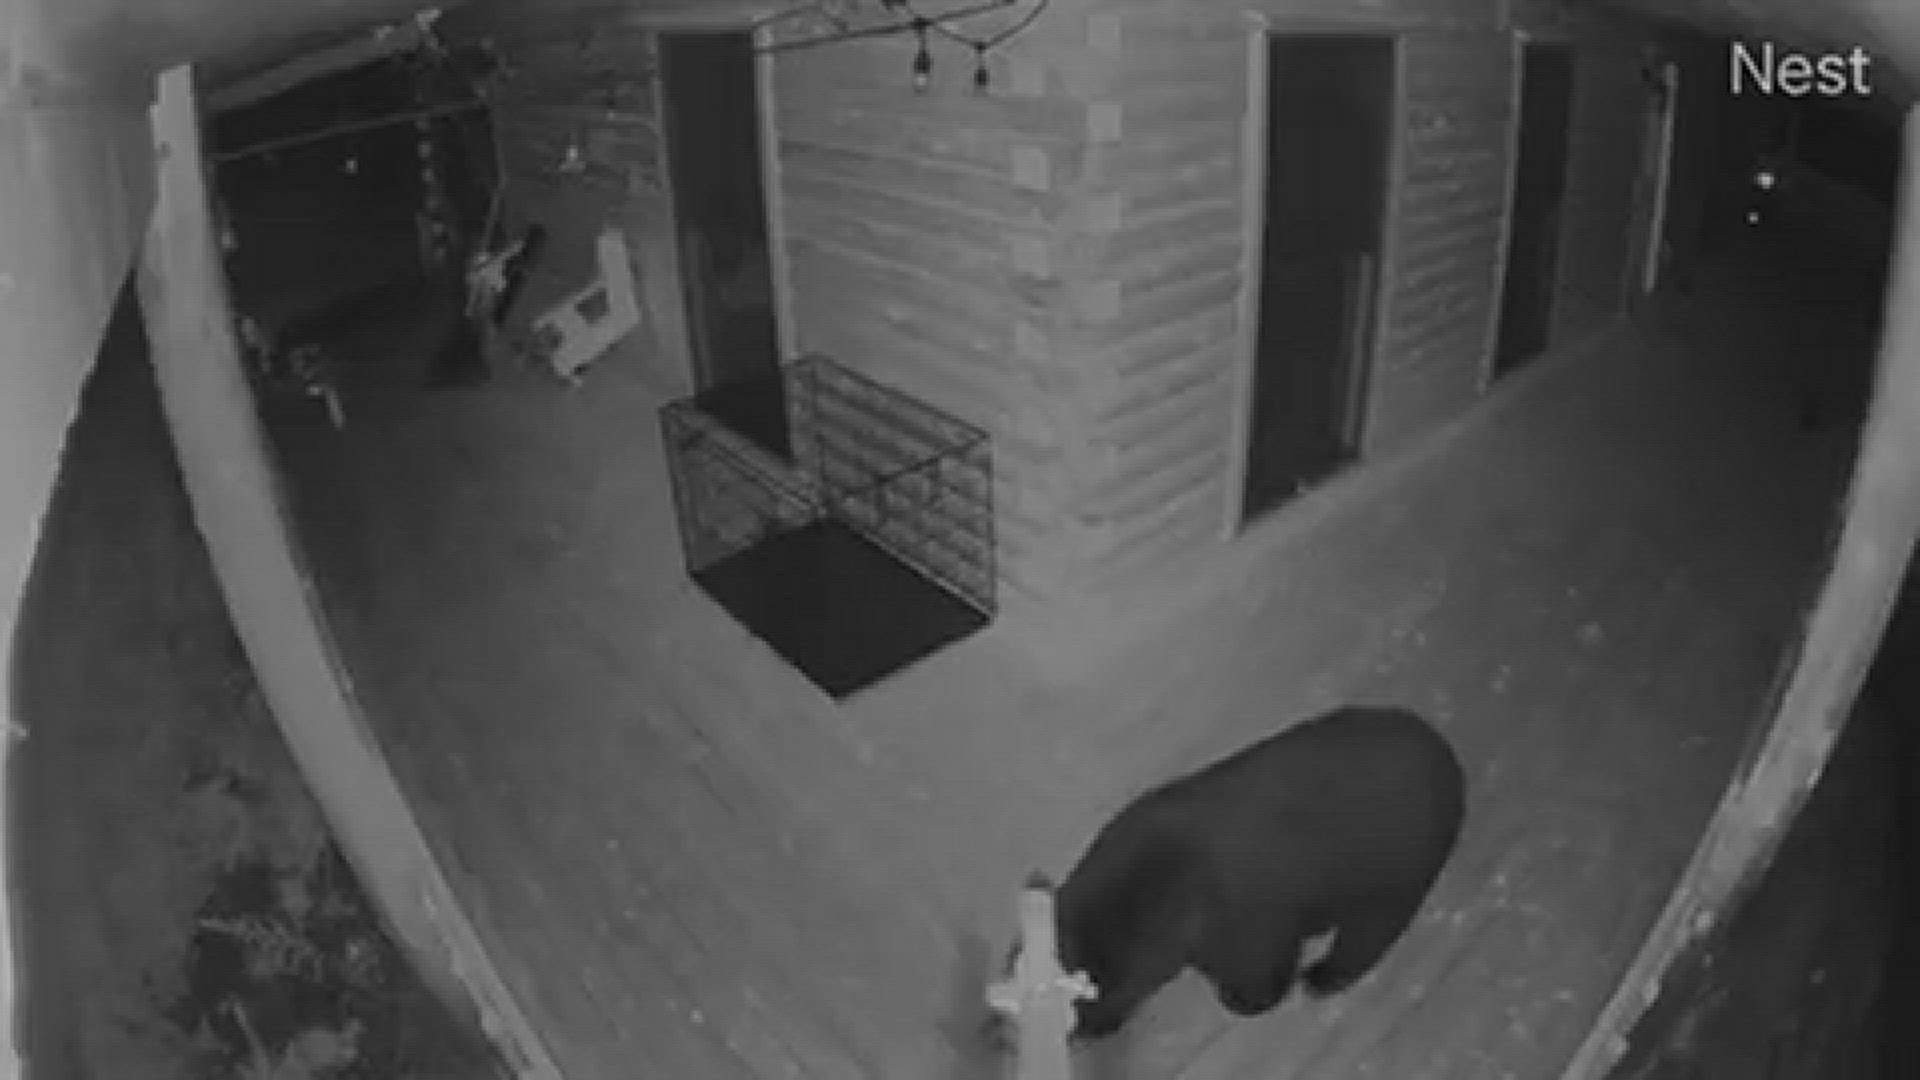 Bear on our front porch at 1 am Wednesday September 13th 2023
Credit: Lynn Verrill